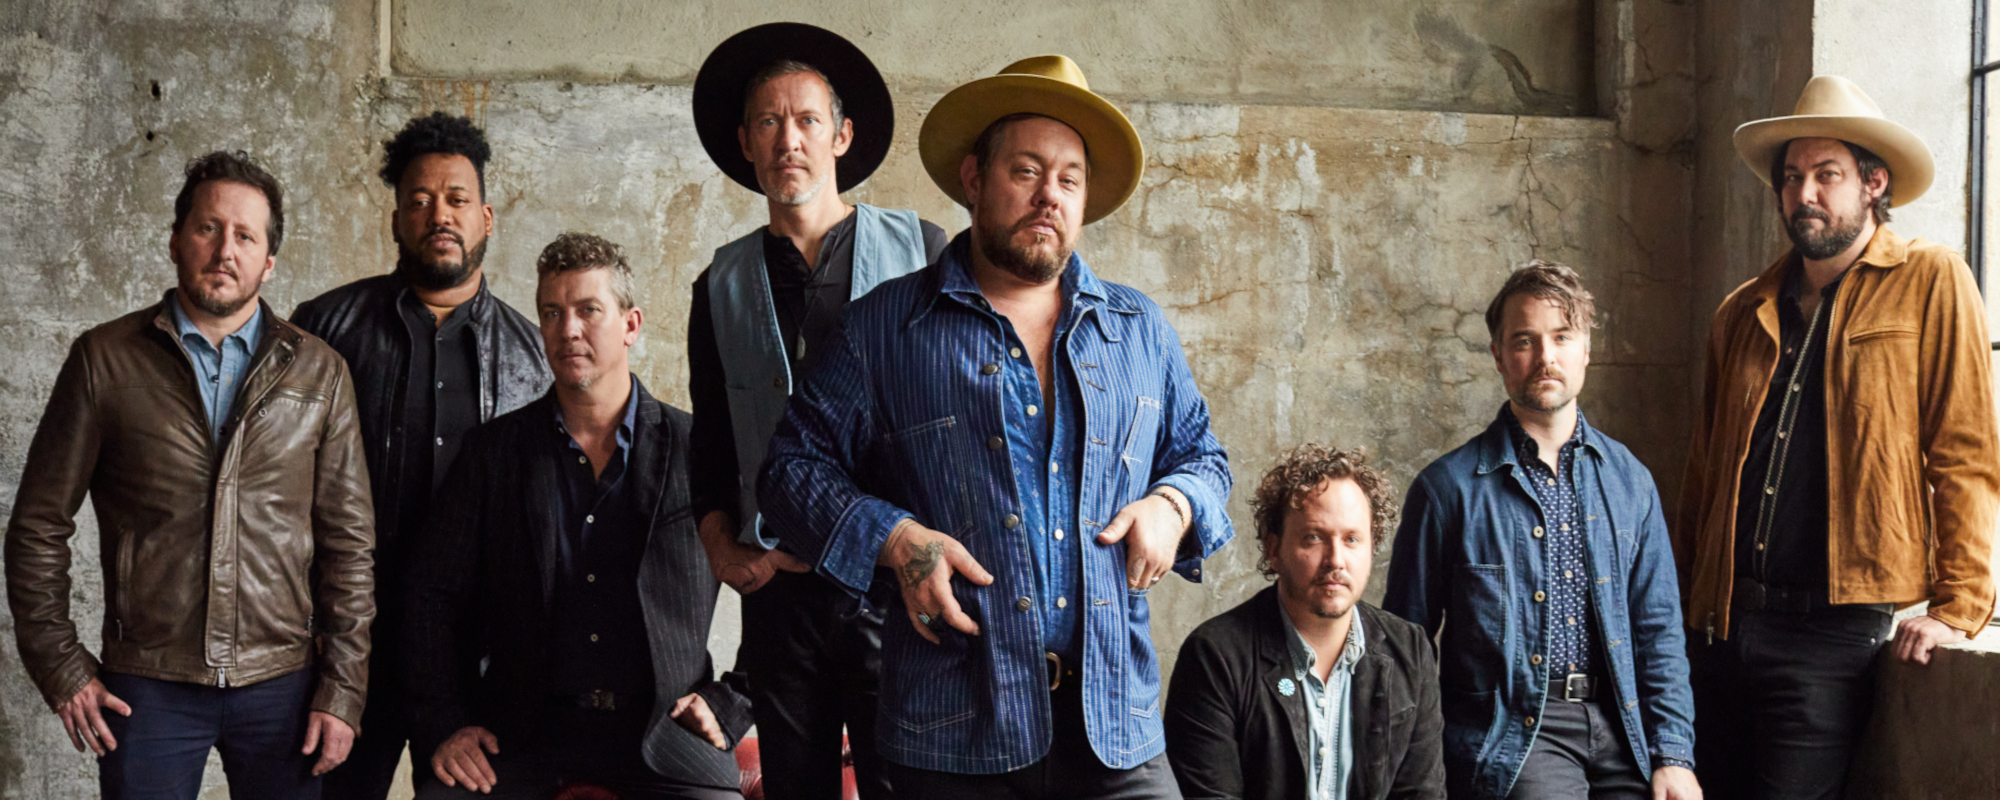 Nathaniel Rateliff & the Night Sweats Announce Summer Tour, New EP Forthcoming